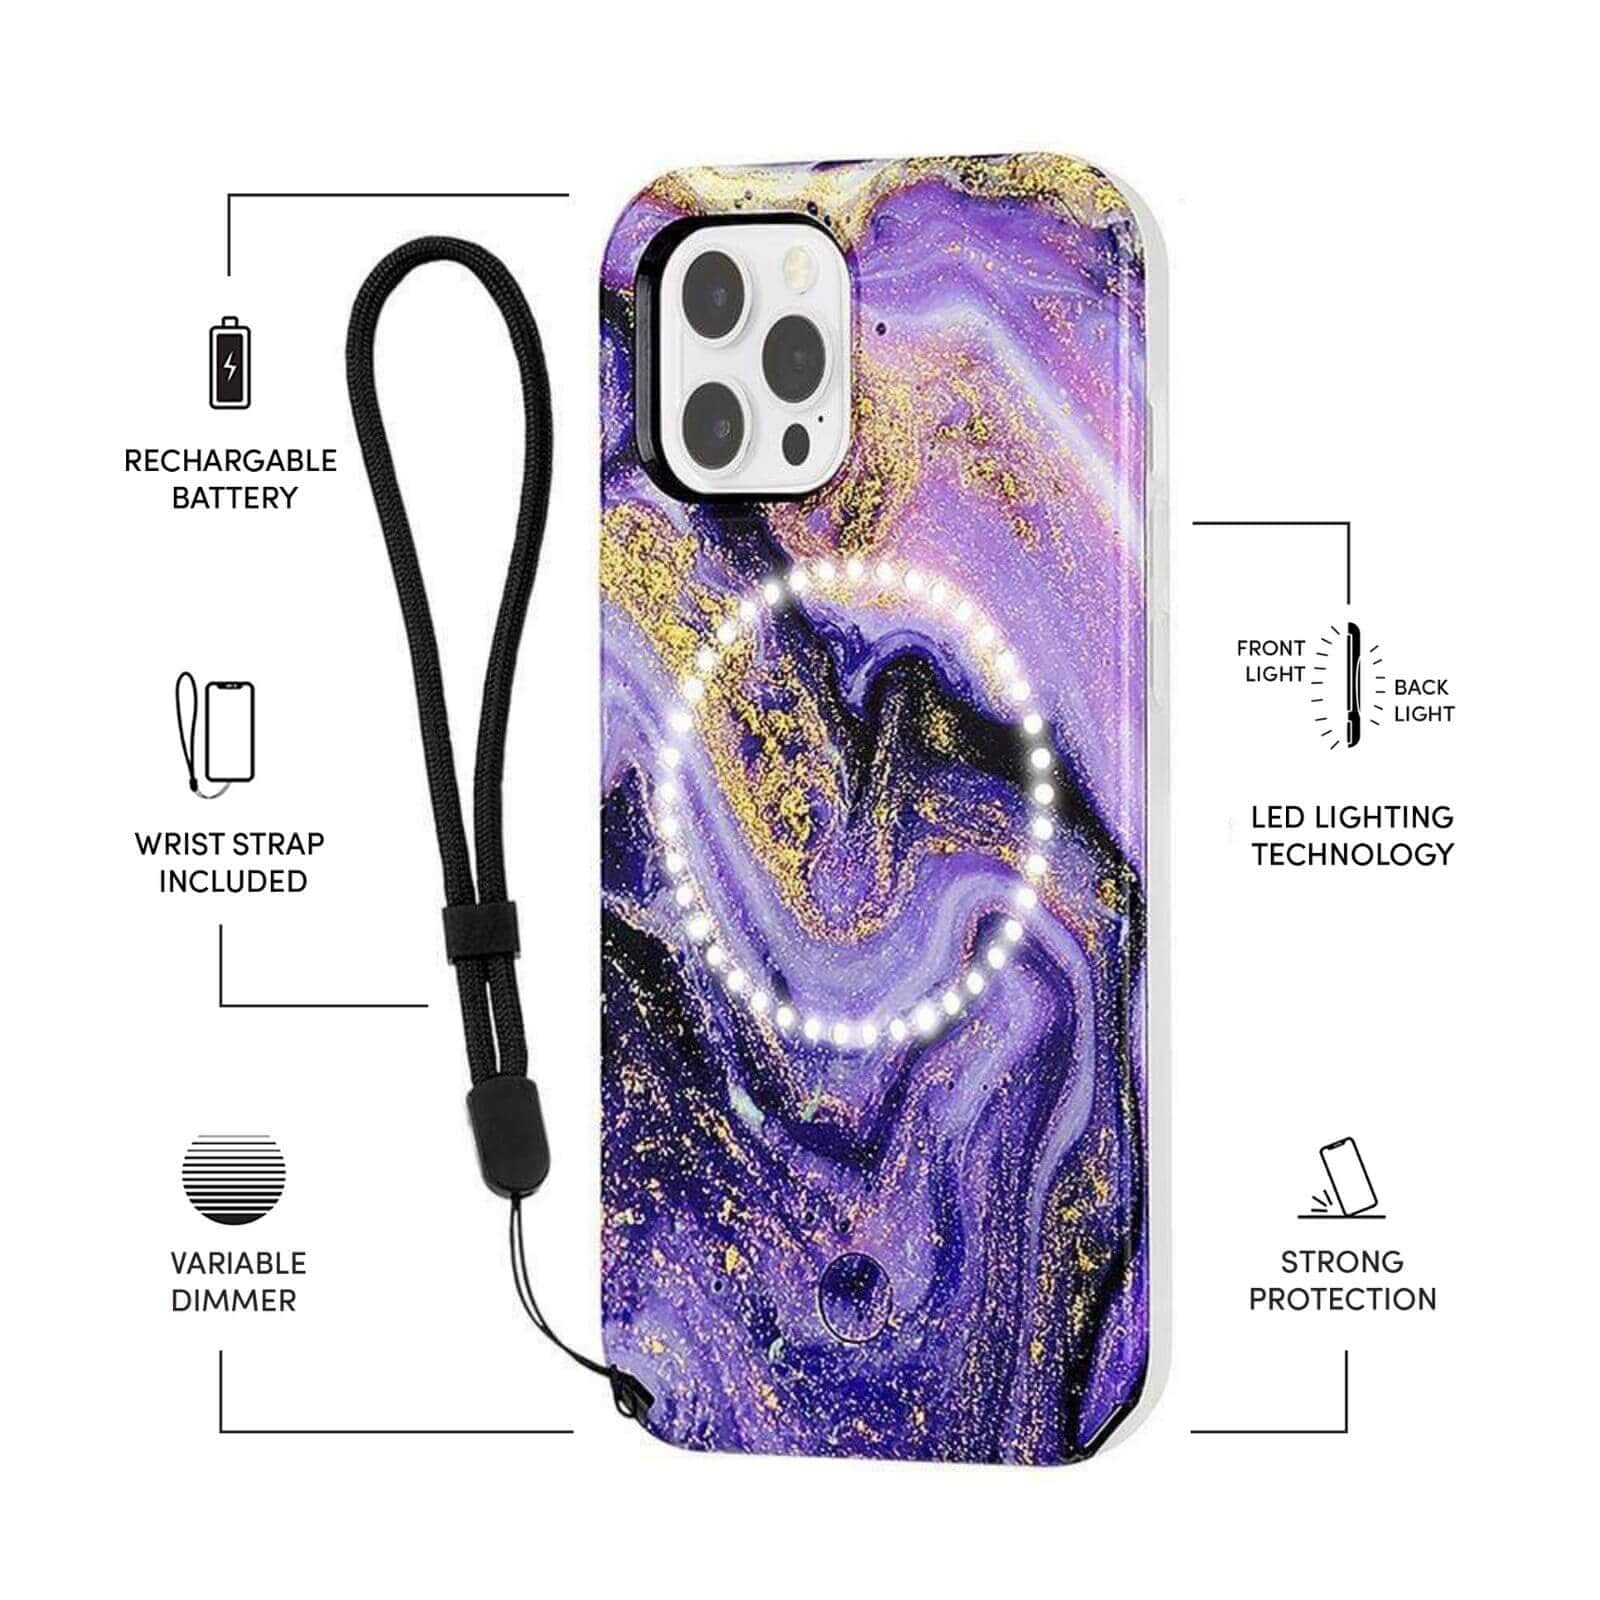 Features Rechargeable Batter, Wrist Strap Included, Variable Dimmer, Front light and back light LED lighting technology, strong protection. color::Gold Glitter Purple Marble